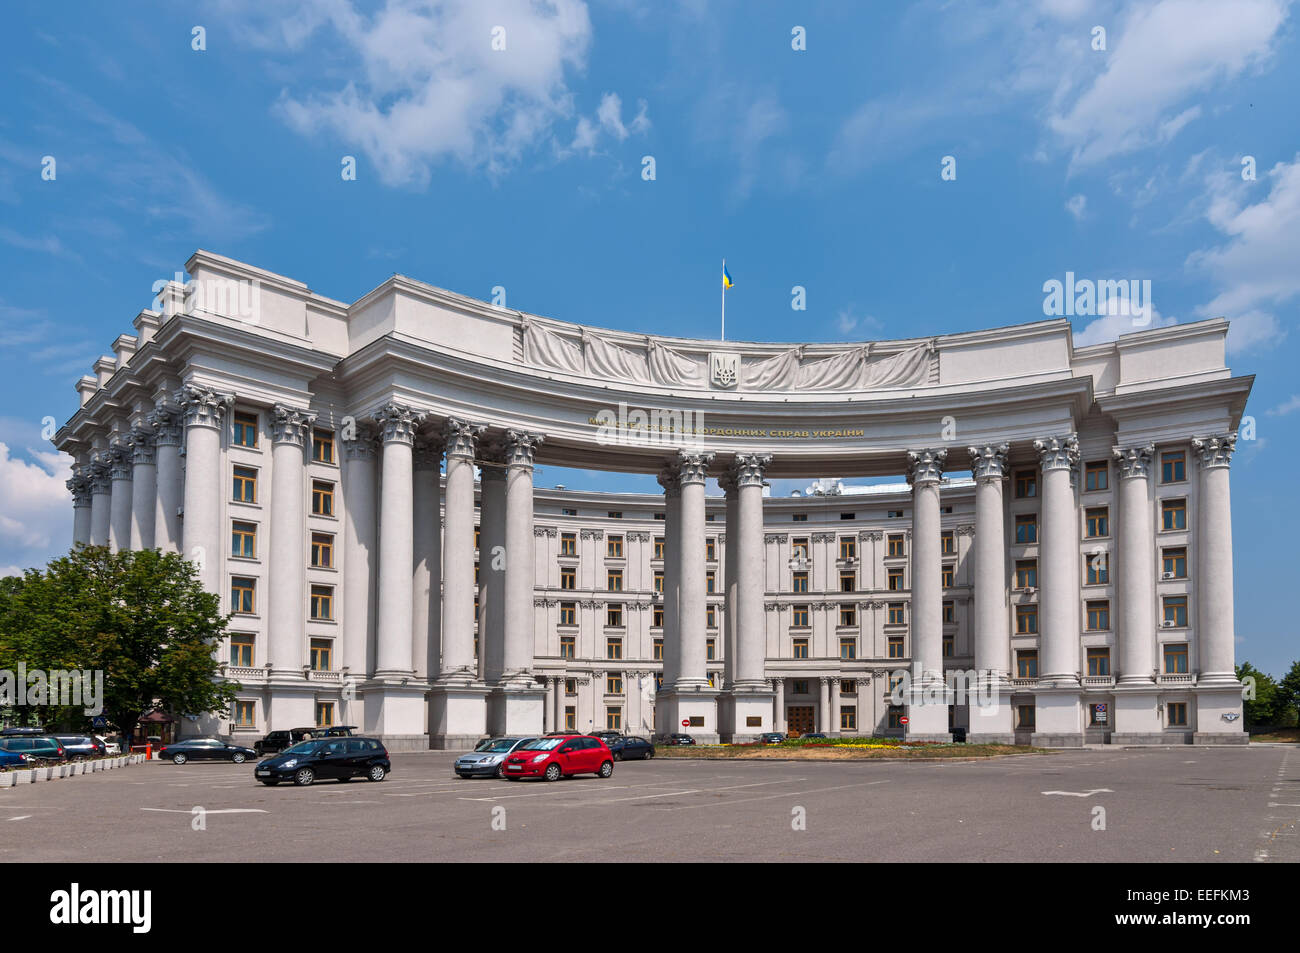 Kiev, Ukraine - June 18, 2011: Building of the Ministry of Foreign Affairs in Kiev at June 18, 2011. Stock Photo